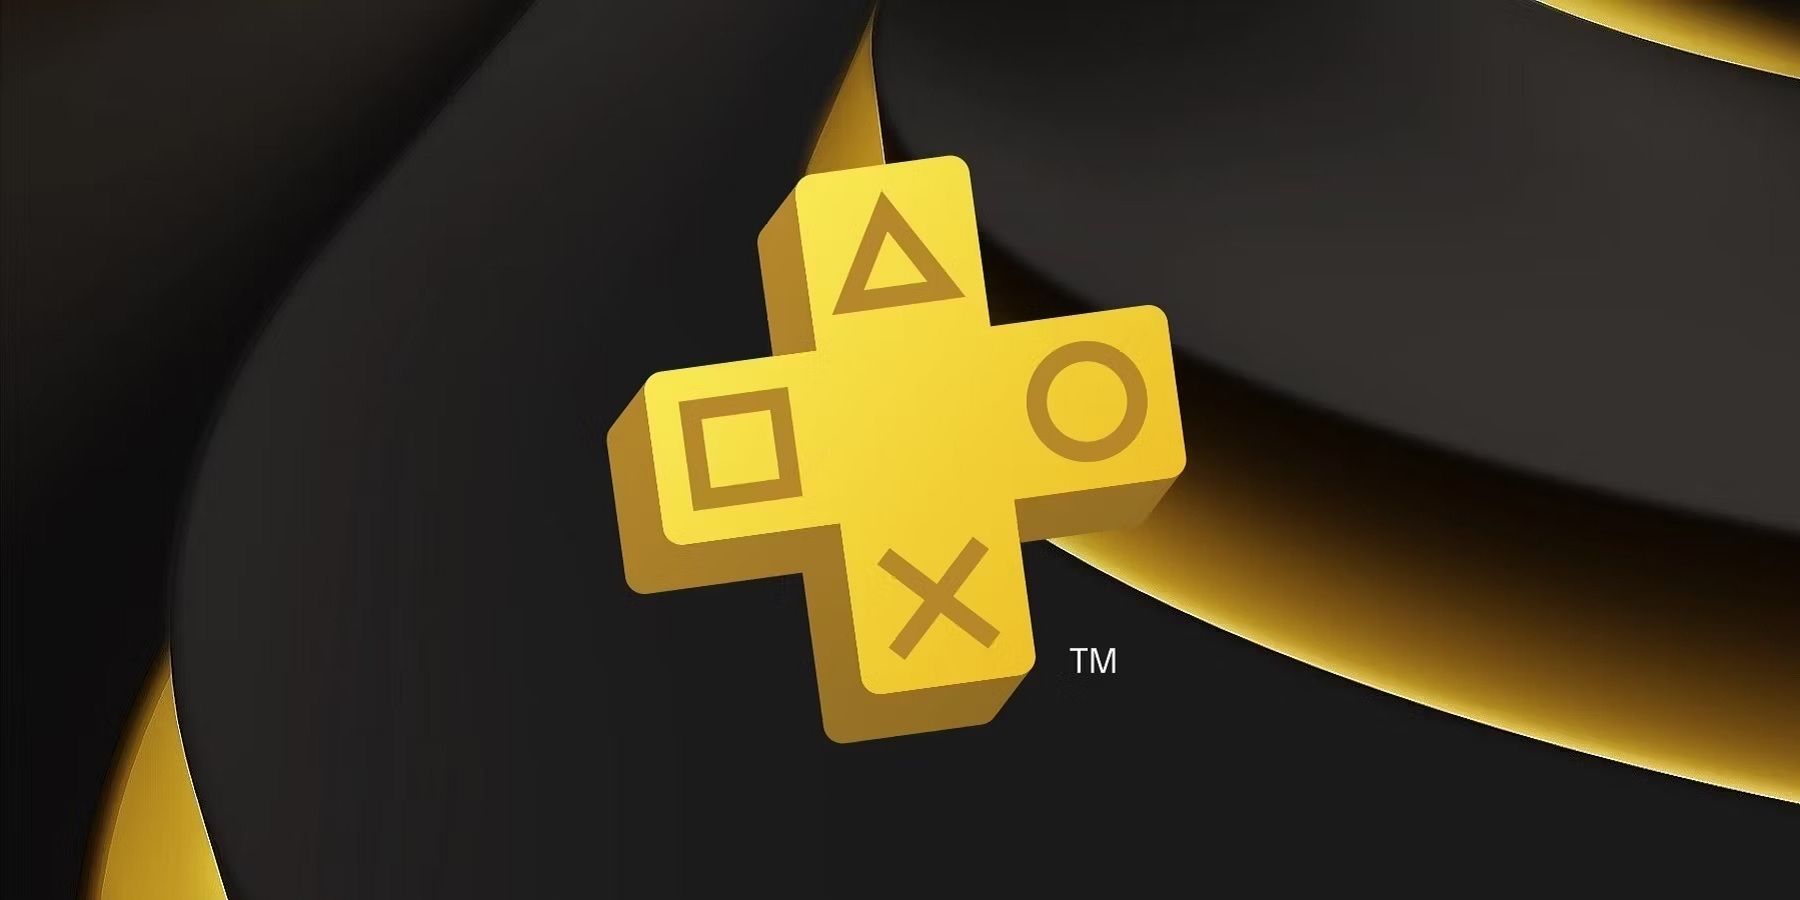 Rumor: State Of Play Incoming Alongside PS Plus Price Increase